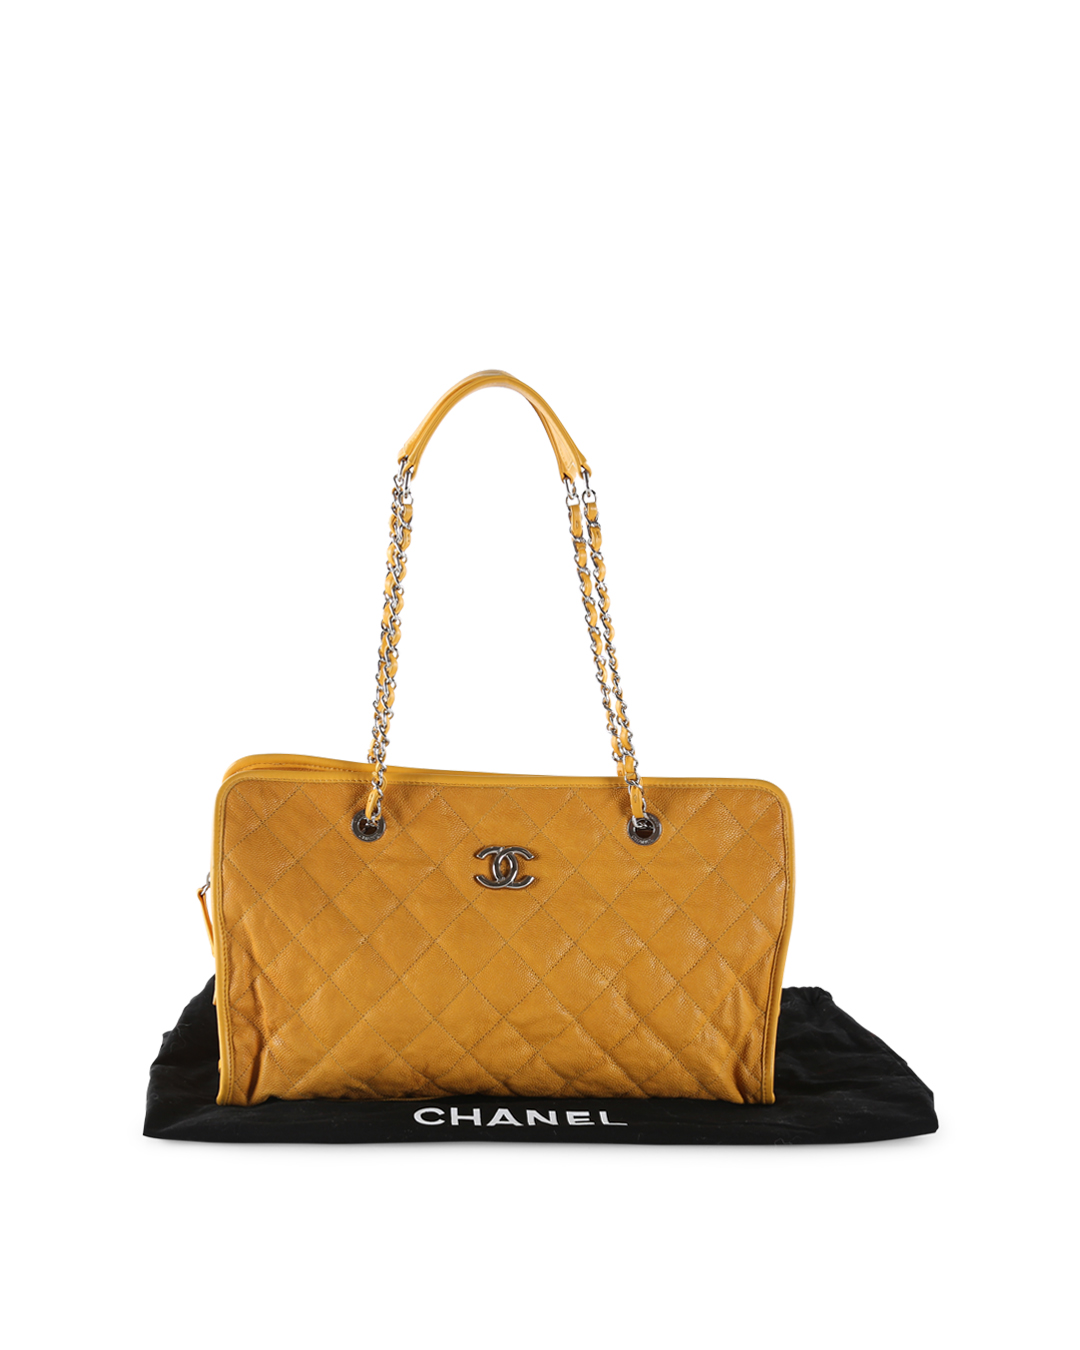 Chanel Yellow Caviar Leather French Riviera Large Tote Bag